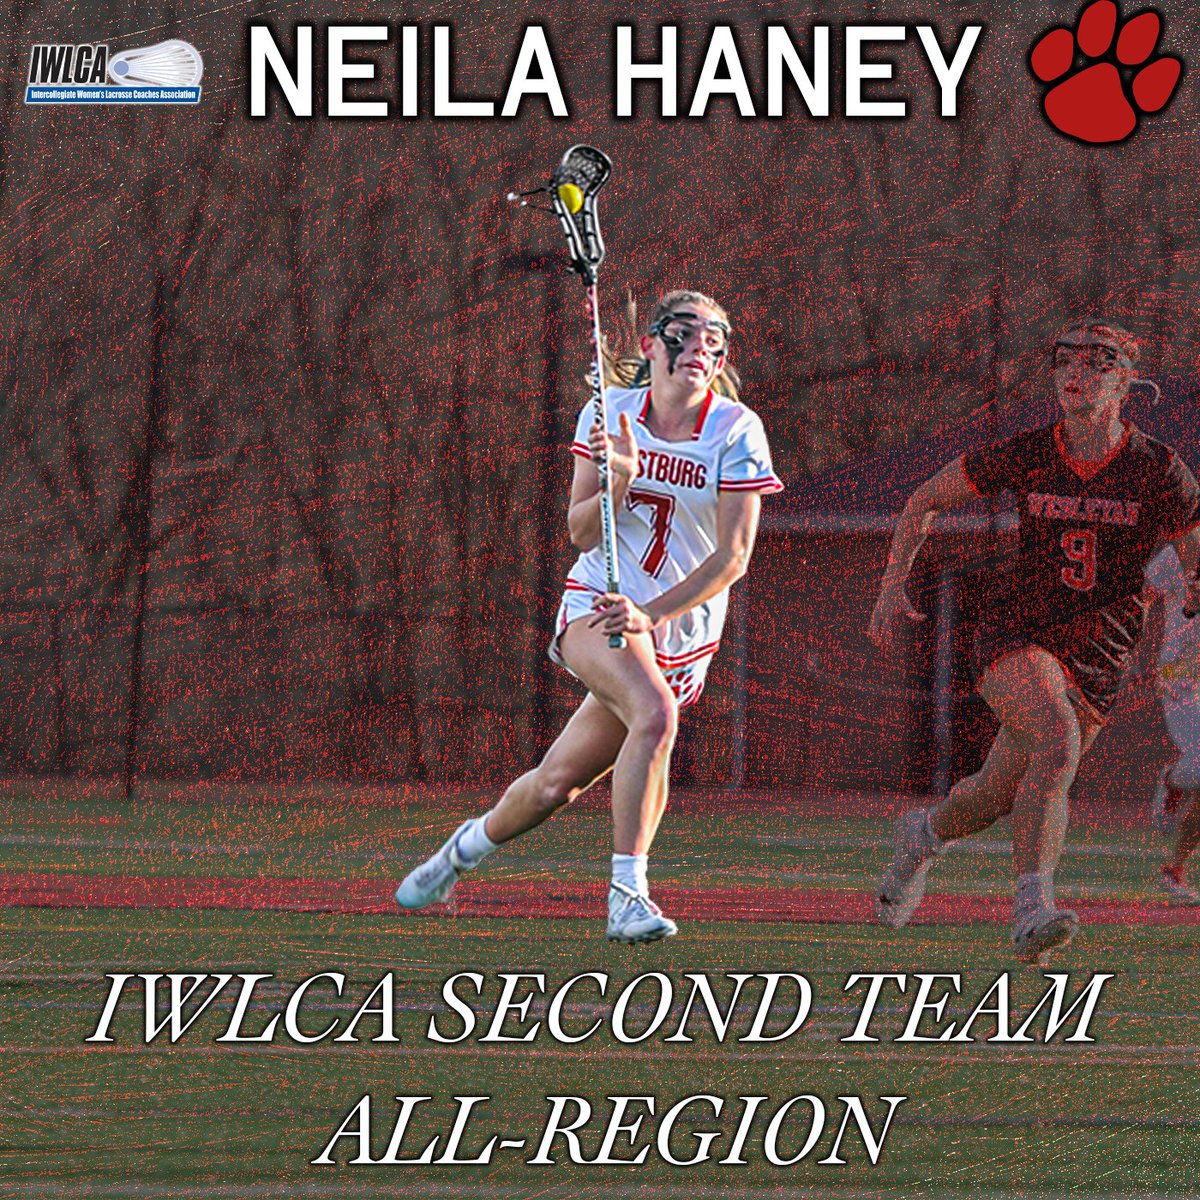 For the second-straight season, Neila receives IWLCA All-Region honors! #BobcatPride